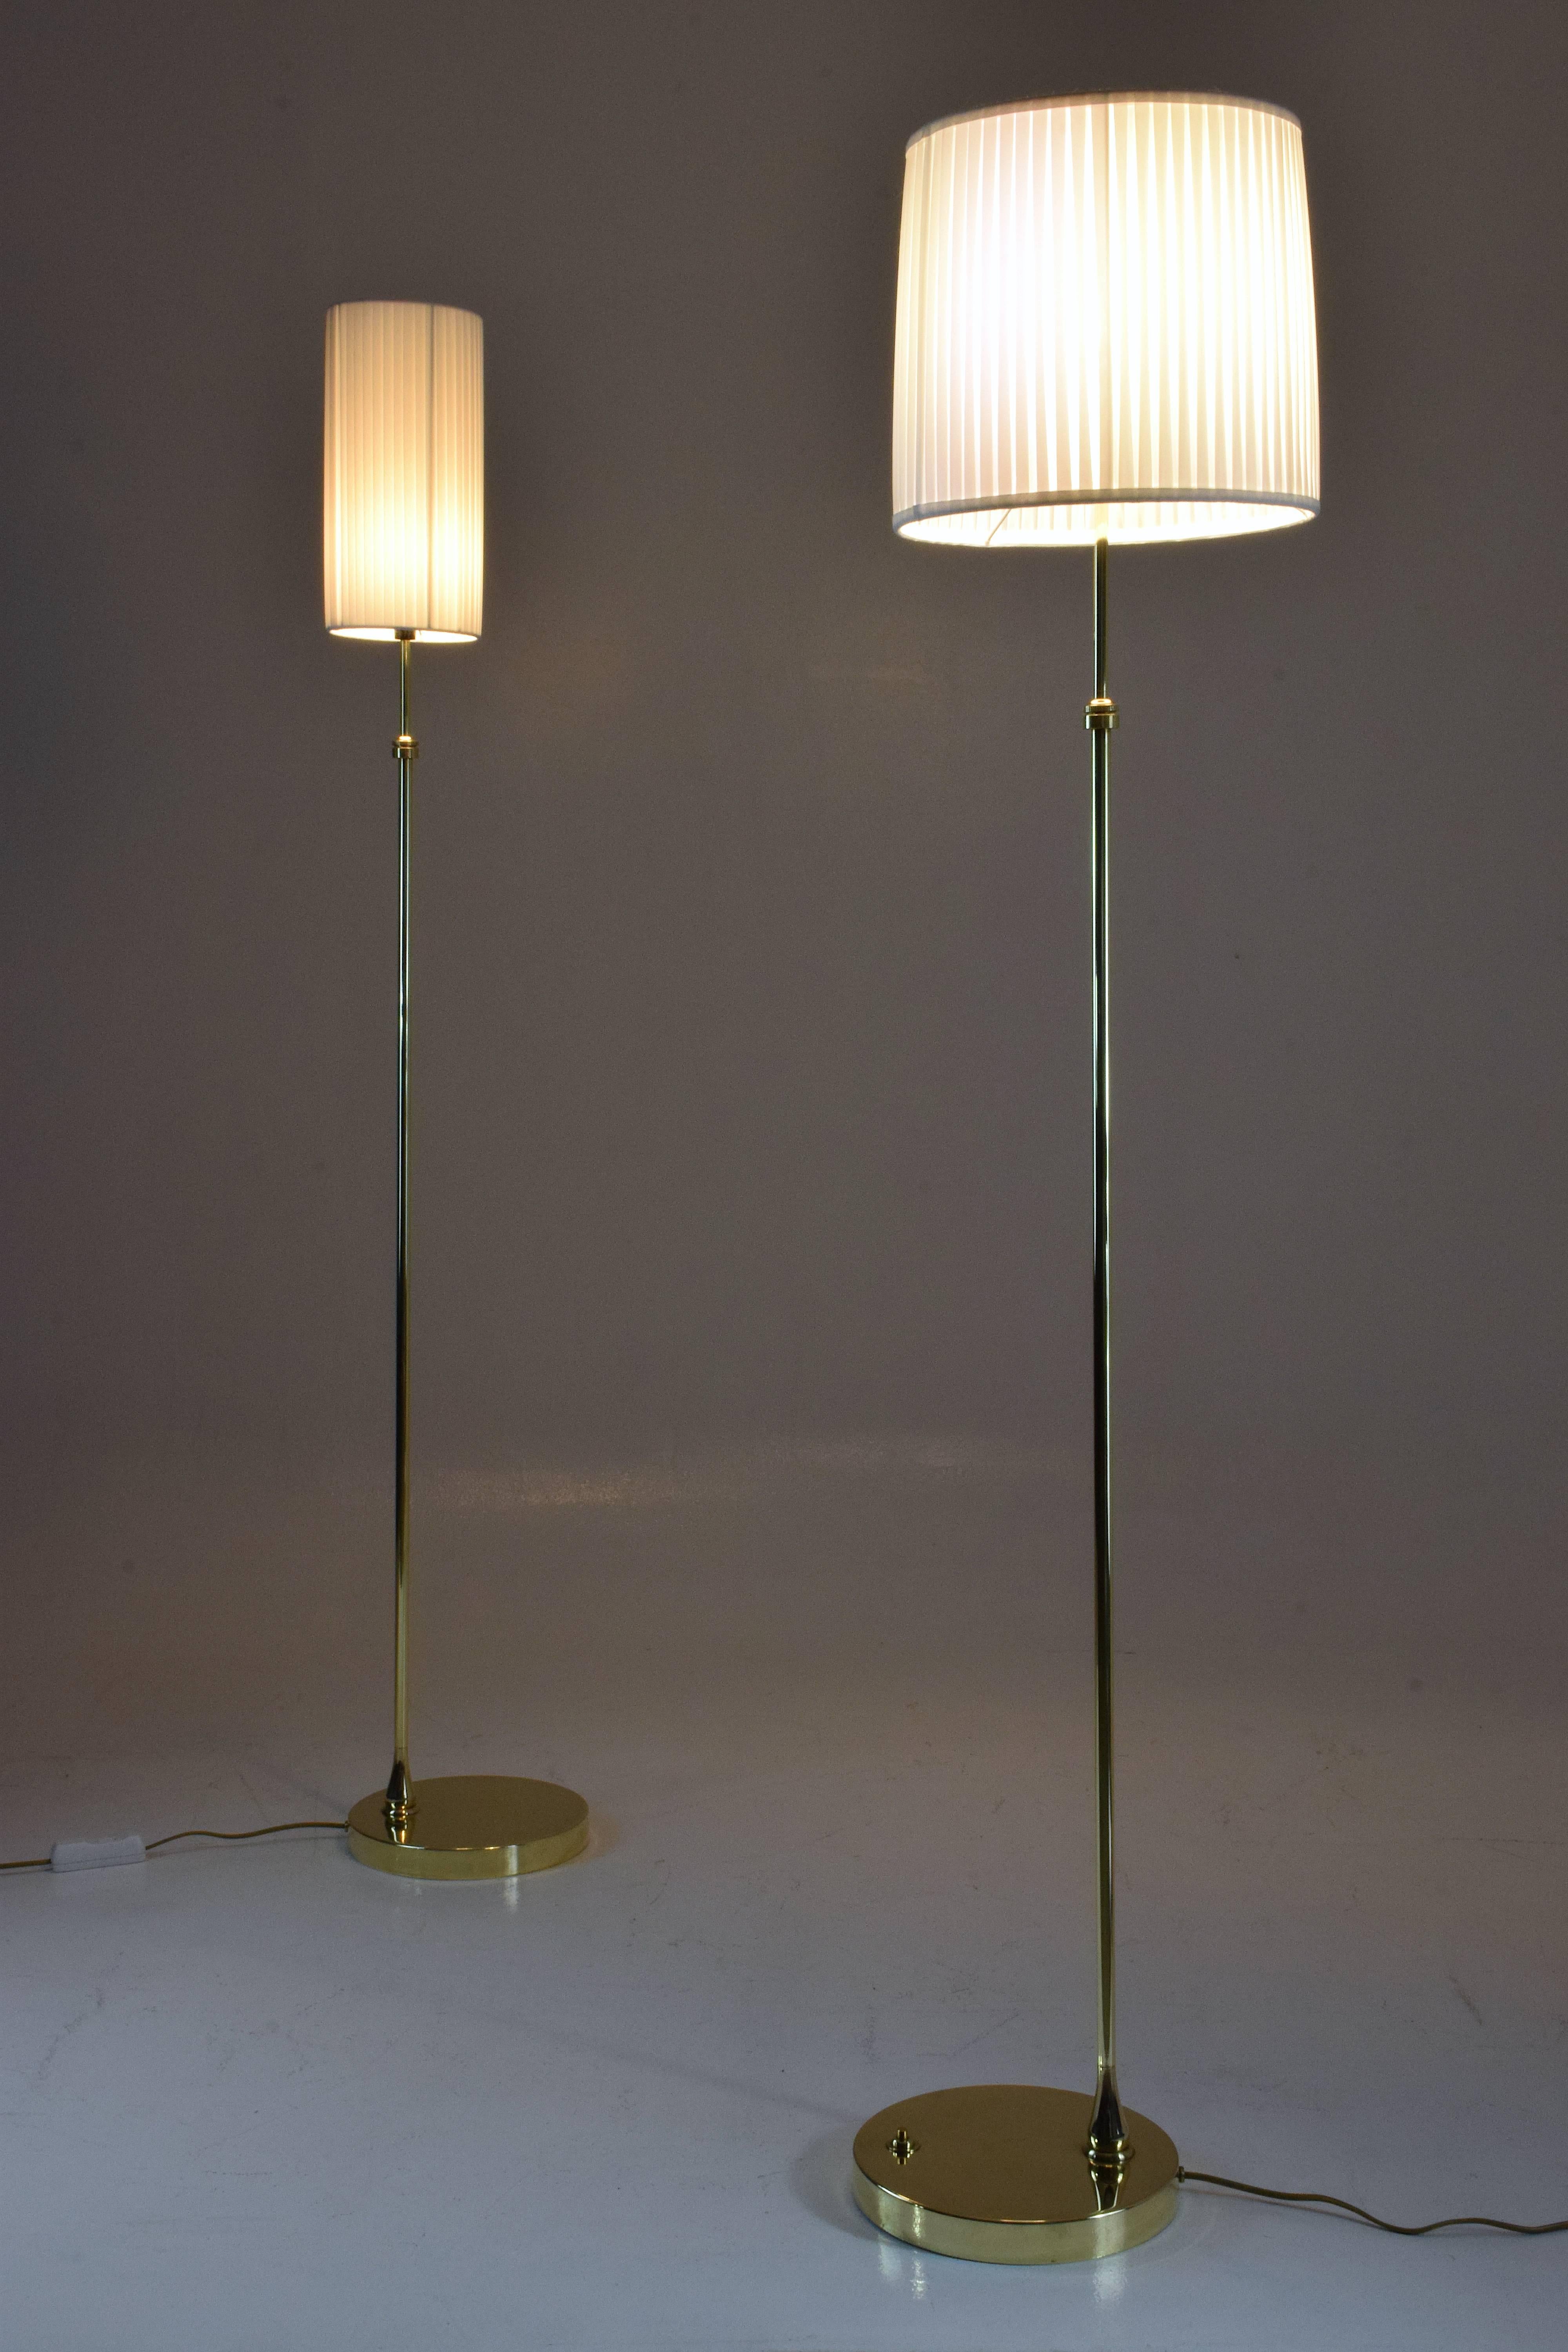 French Equilibrium-I Contemporary Handcrafted Adjustable Brass Floor Lamp